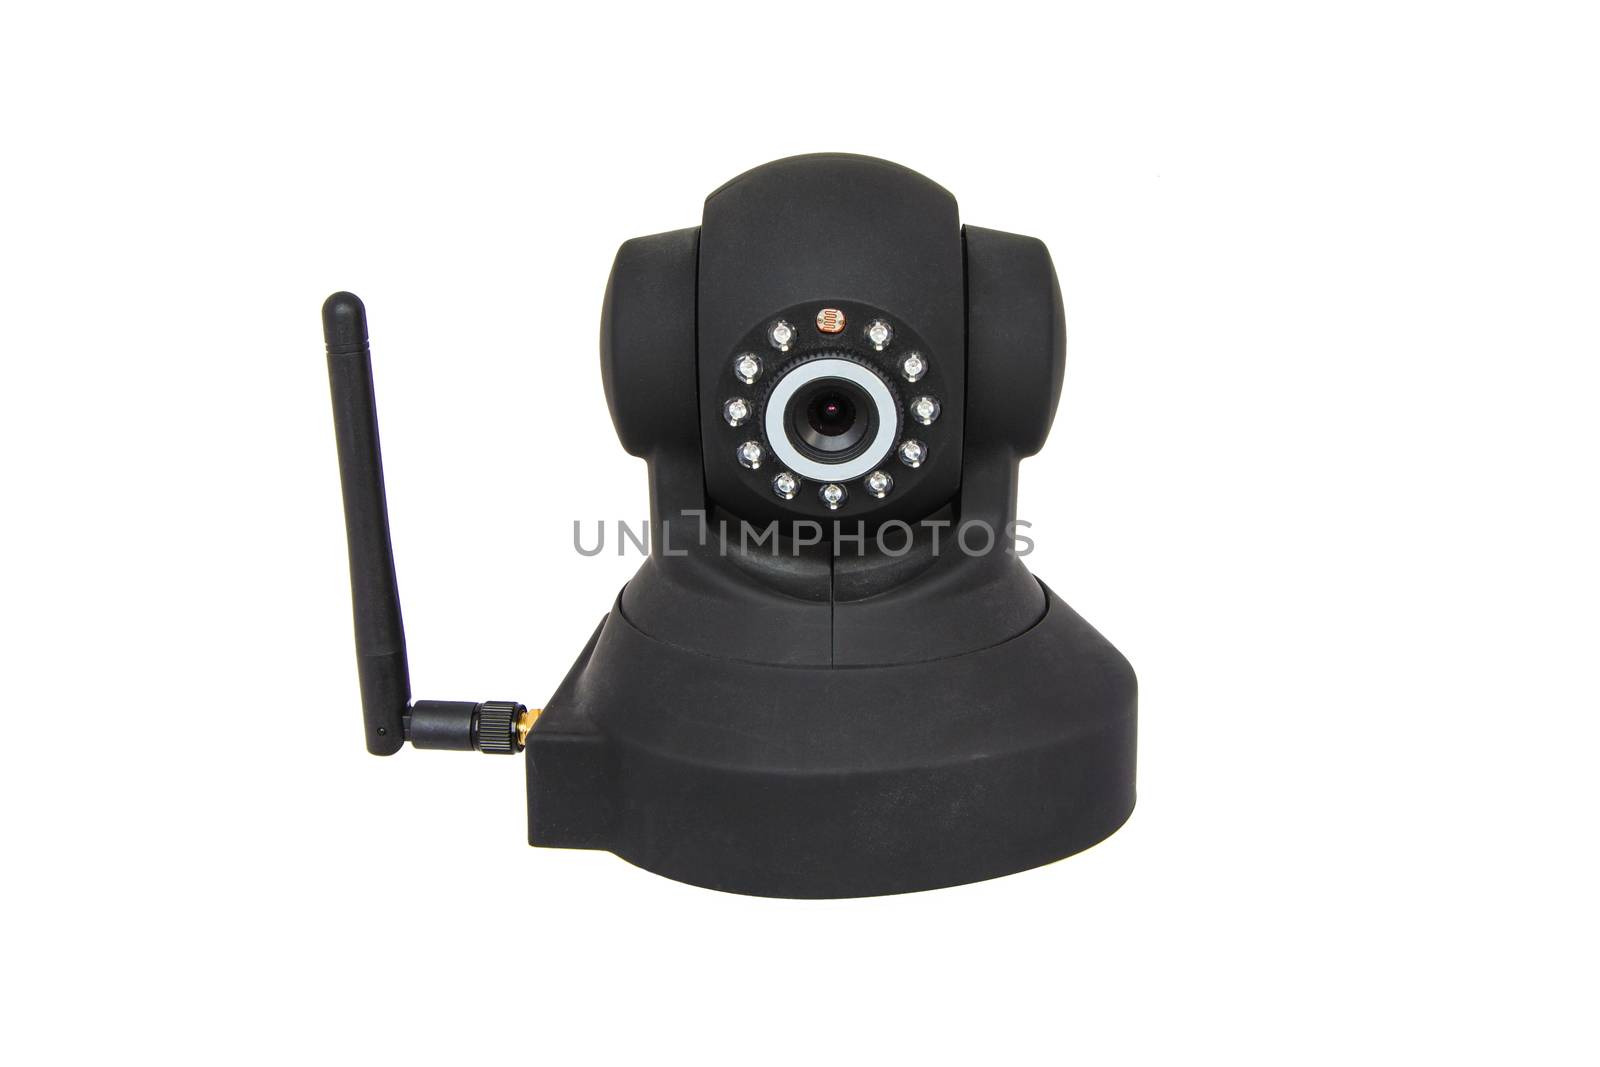 Wireless IP camera with infrared sensors